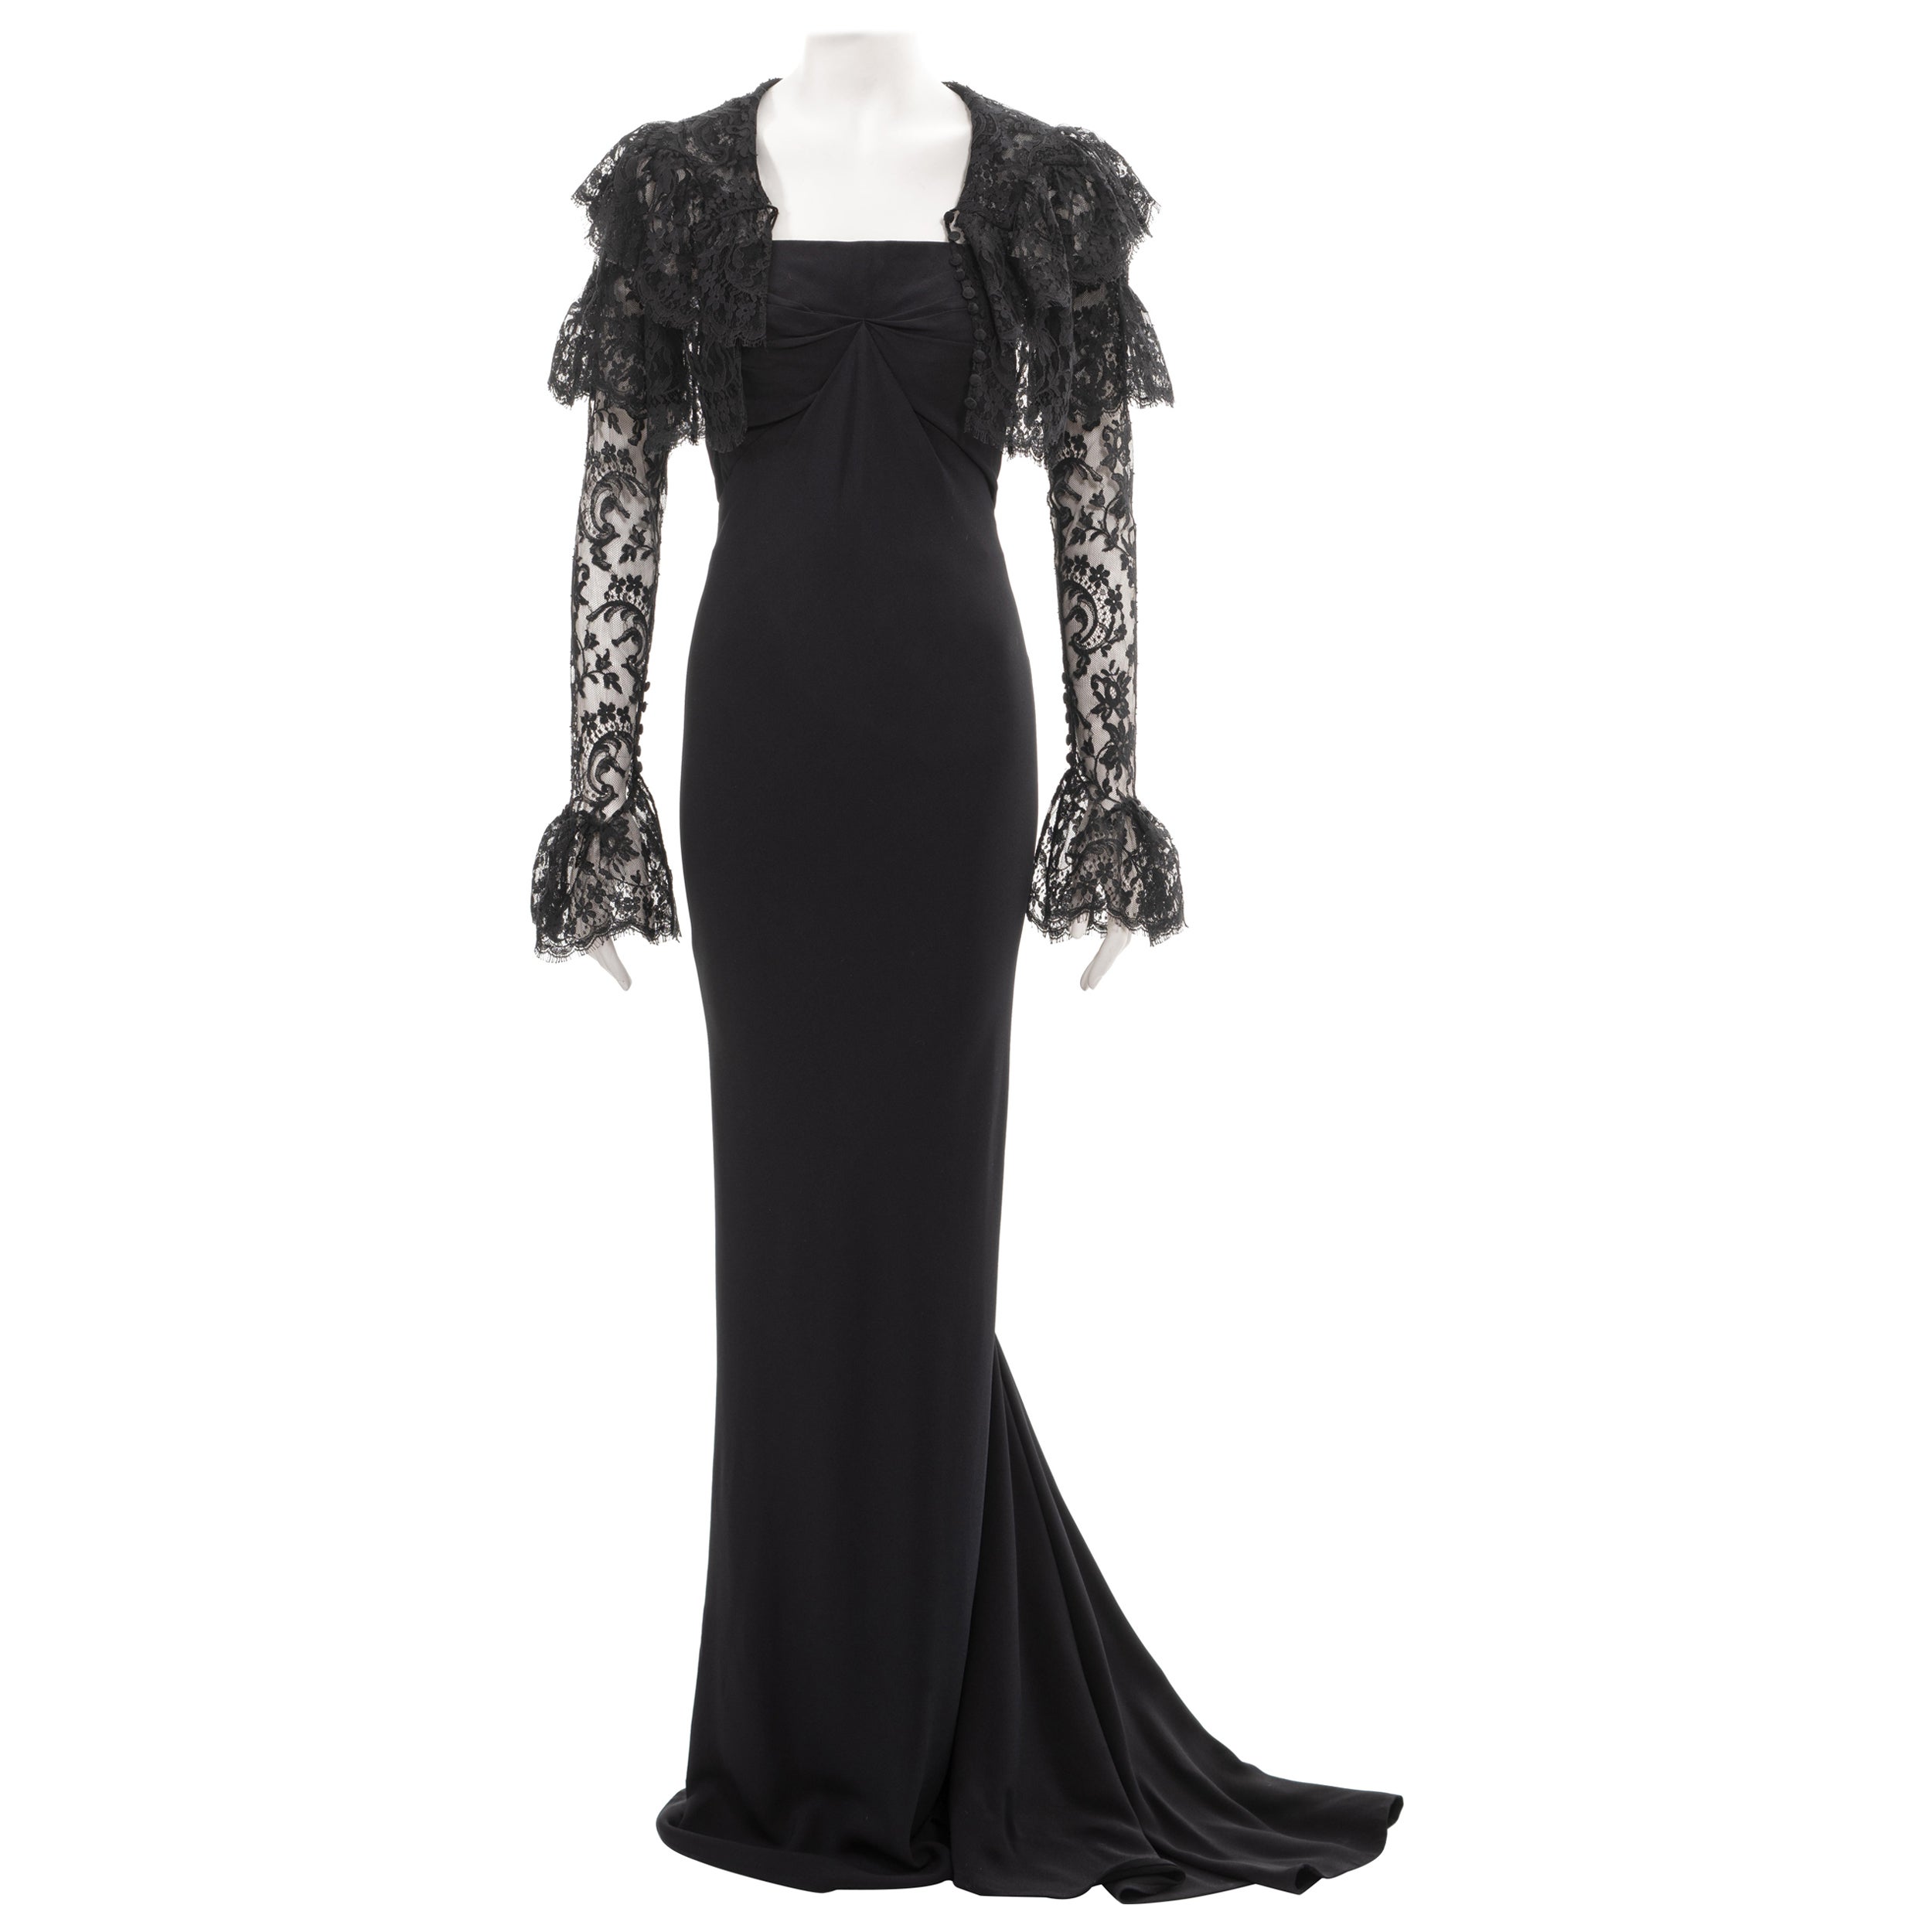 Givenchy by John Galliano black strapless evening dress and lace bolero, ss 1997 For Sale